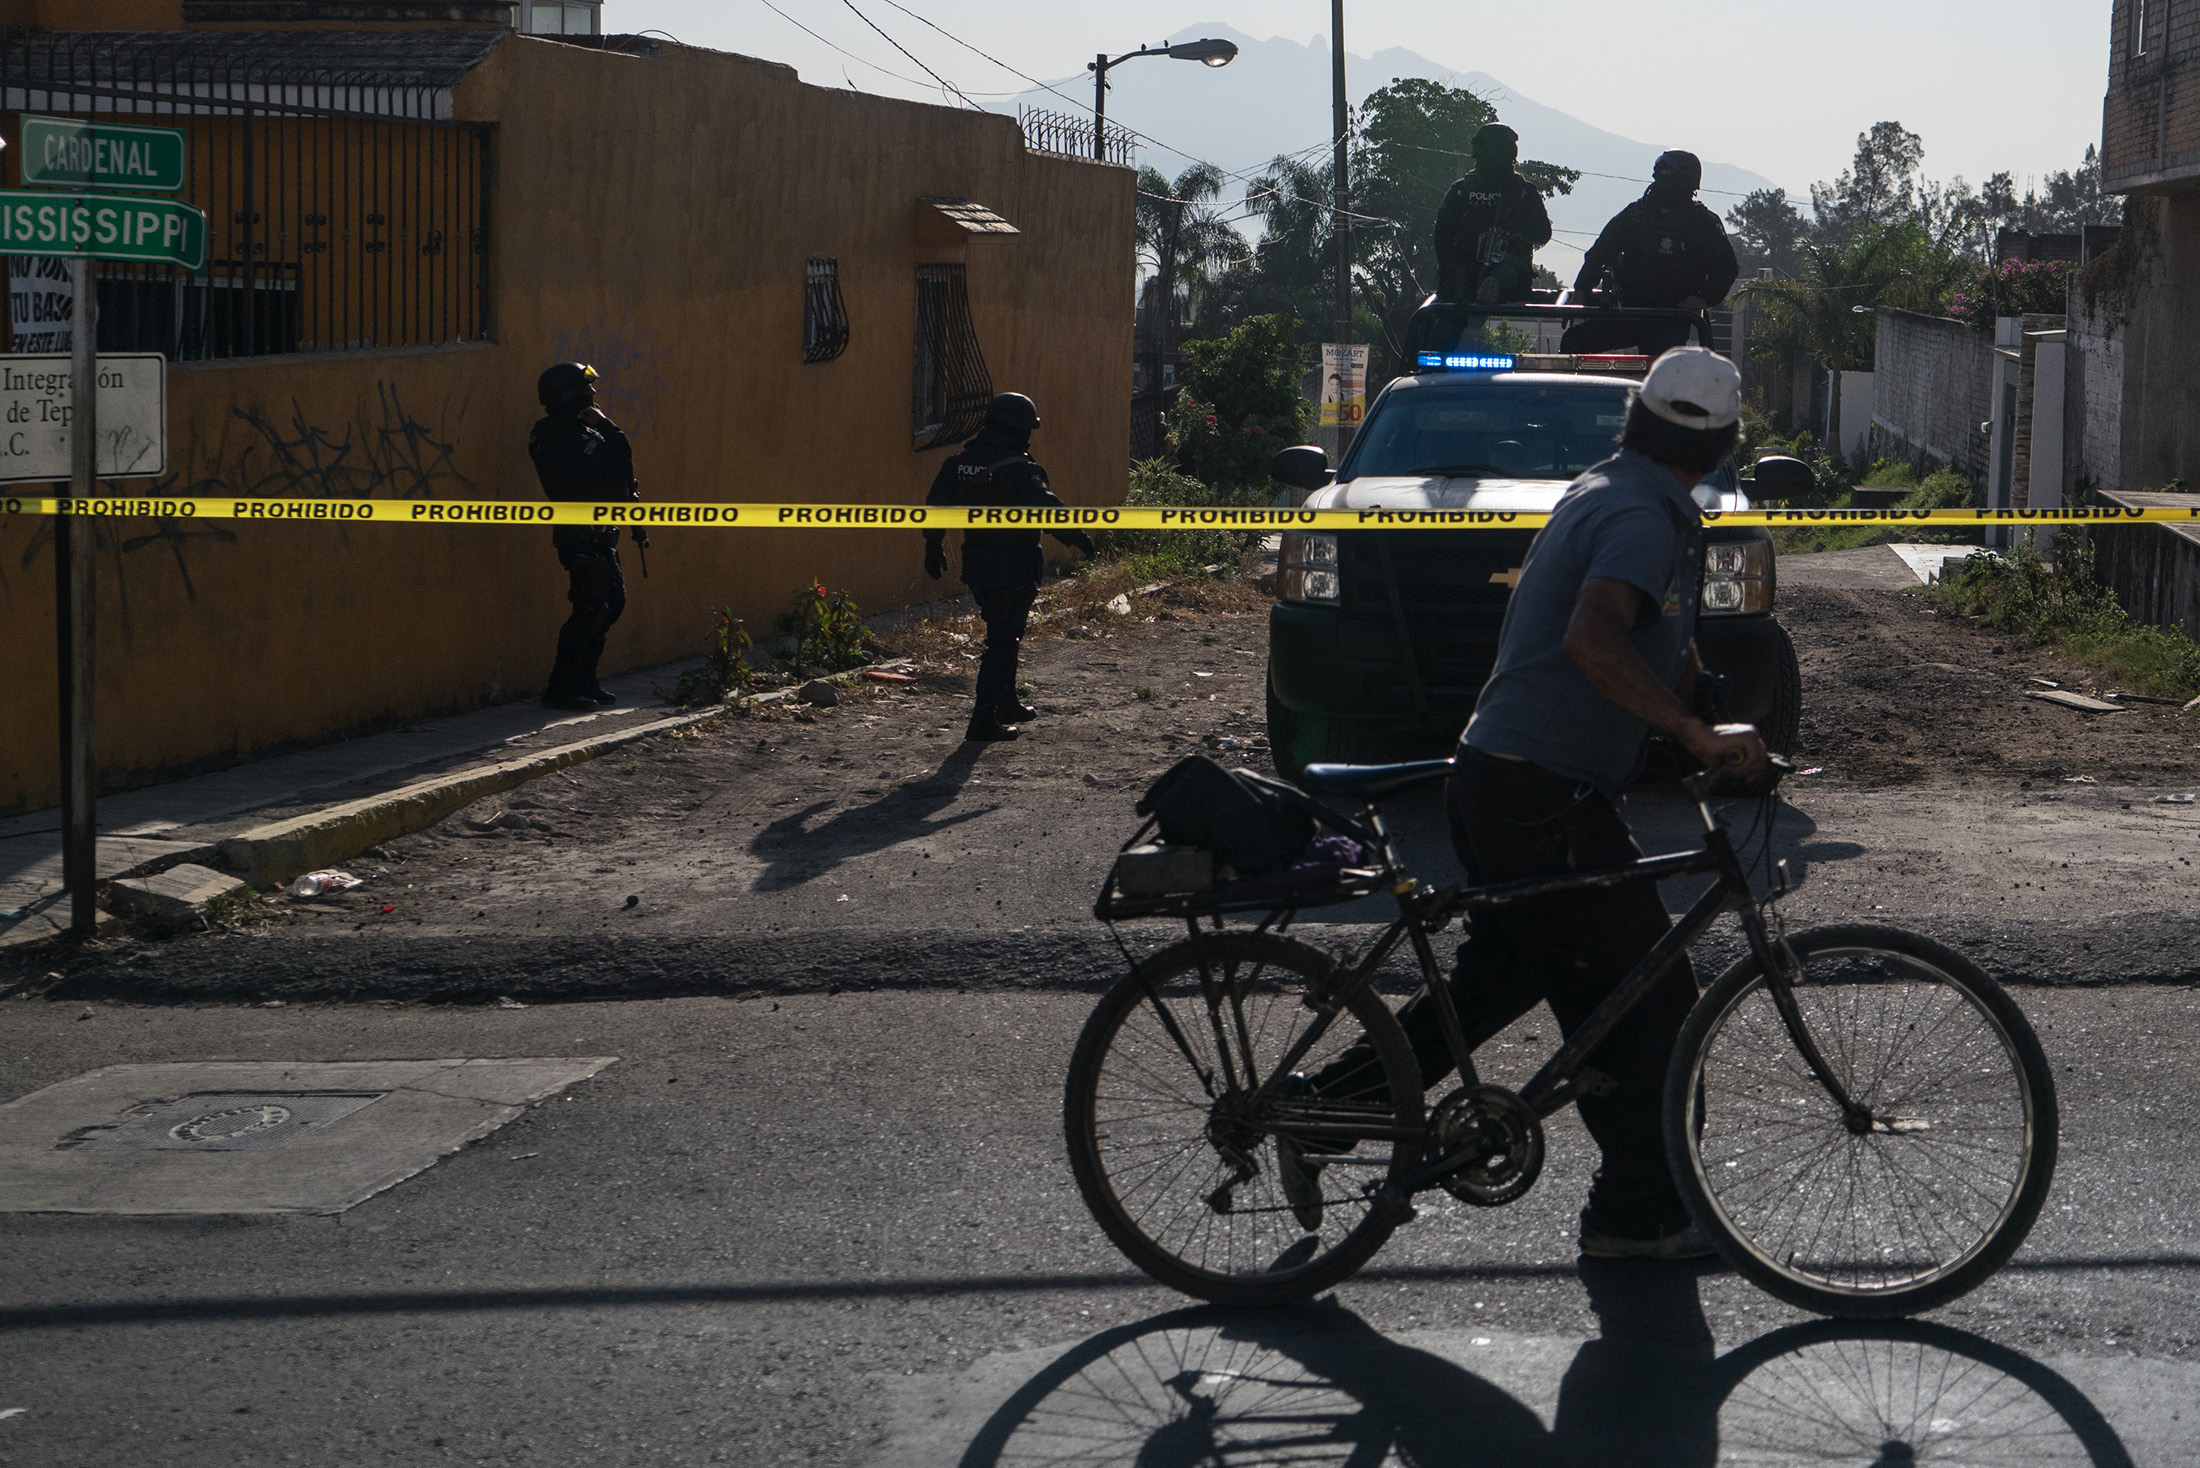 A person rides a bicycle past Nayarit police officers blocking off an area near where forces killed Juan Francisco Patrón Sánchez (known locally as H2), leader of the Beltran Leyva Cartel, the night before in the Nayarit capital of Tepic, Mexico, on Feb. 10, 2017.
